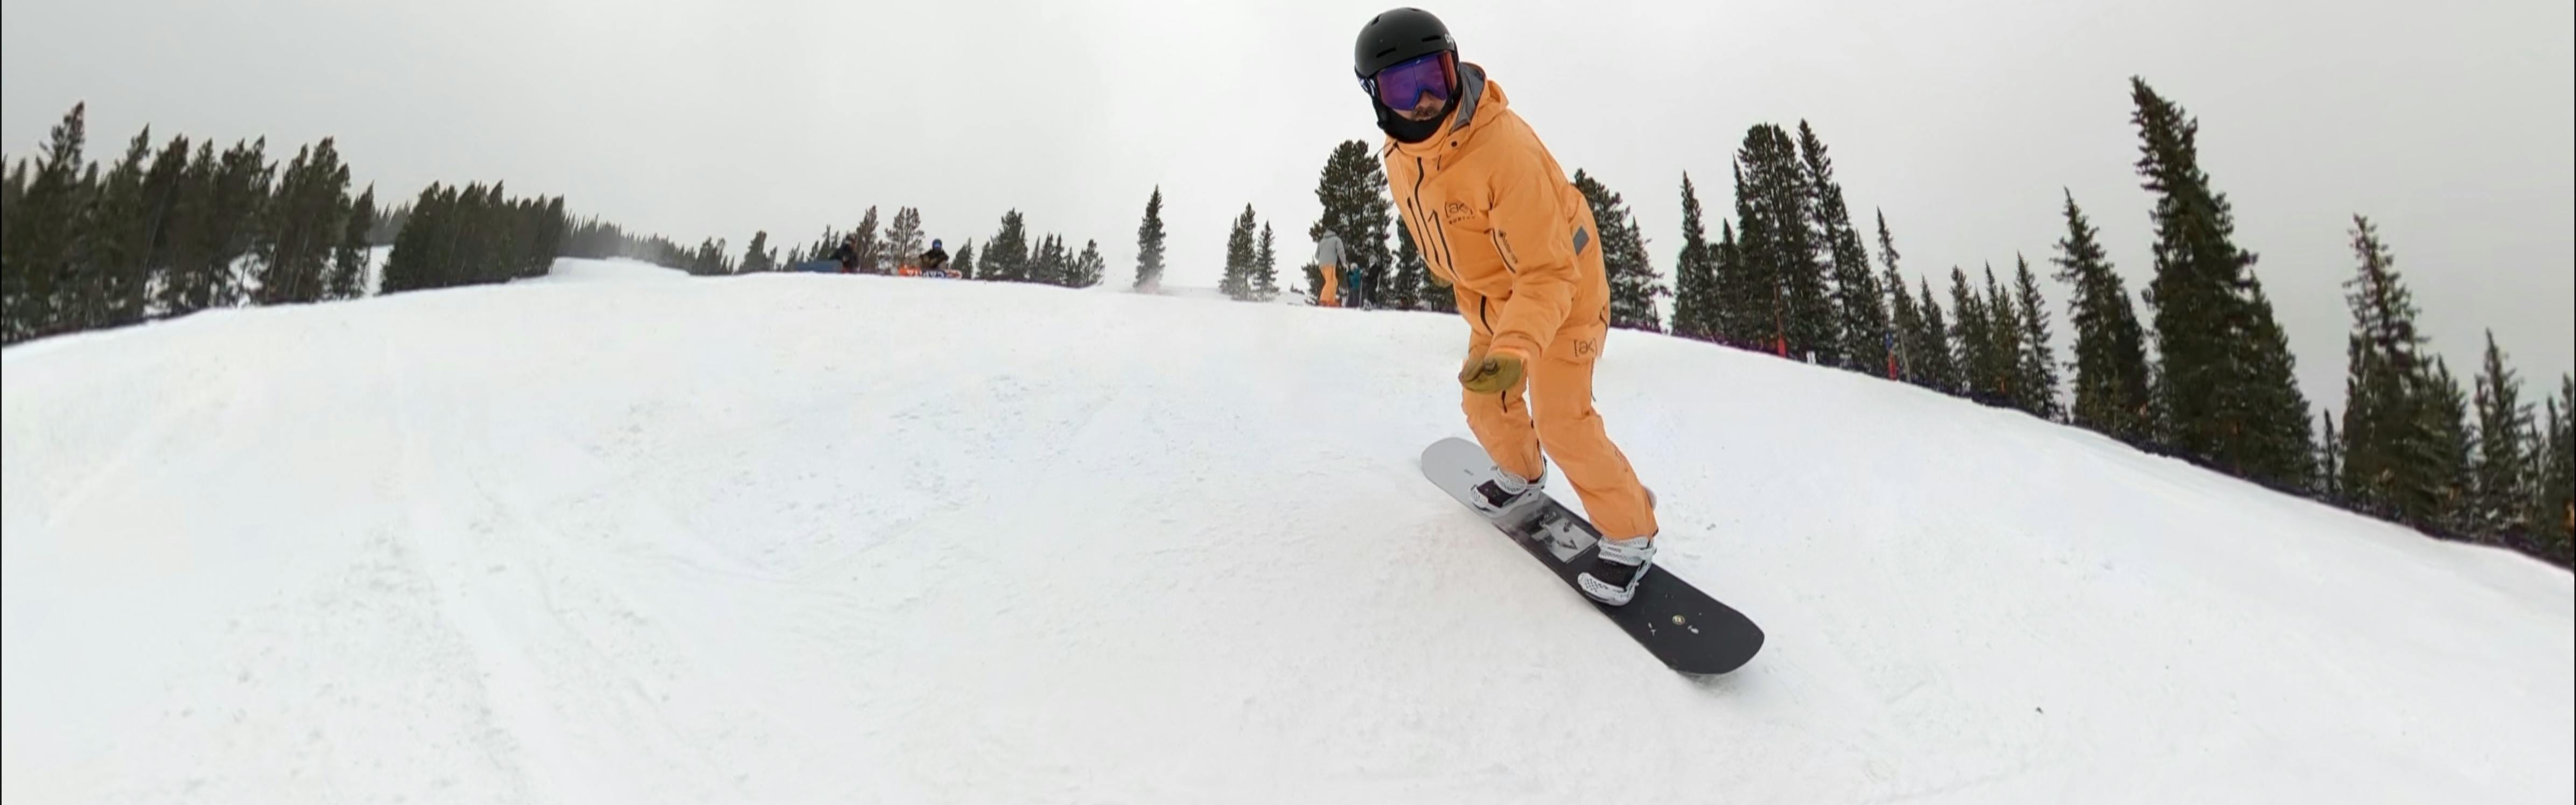 Tuning Your Snowboard